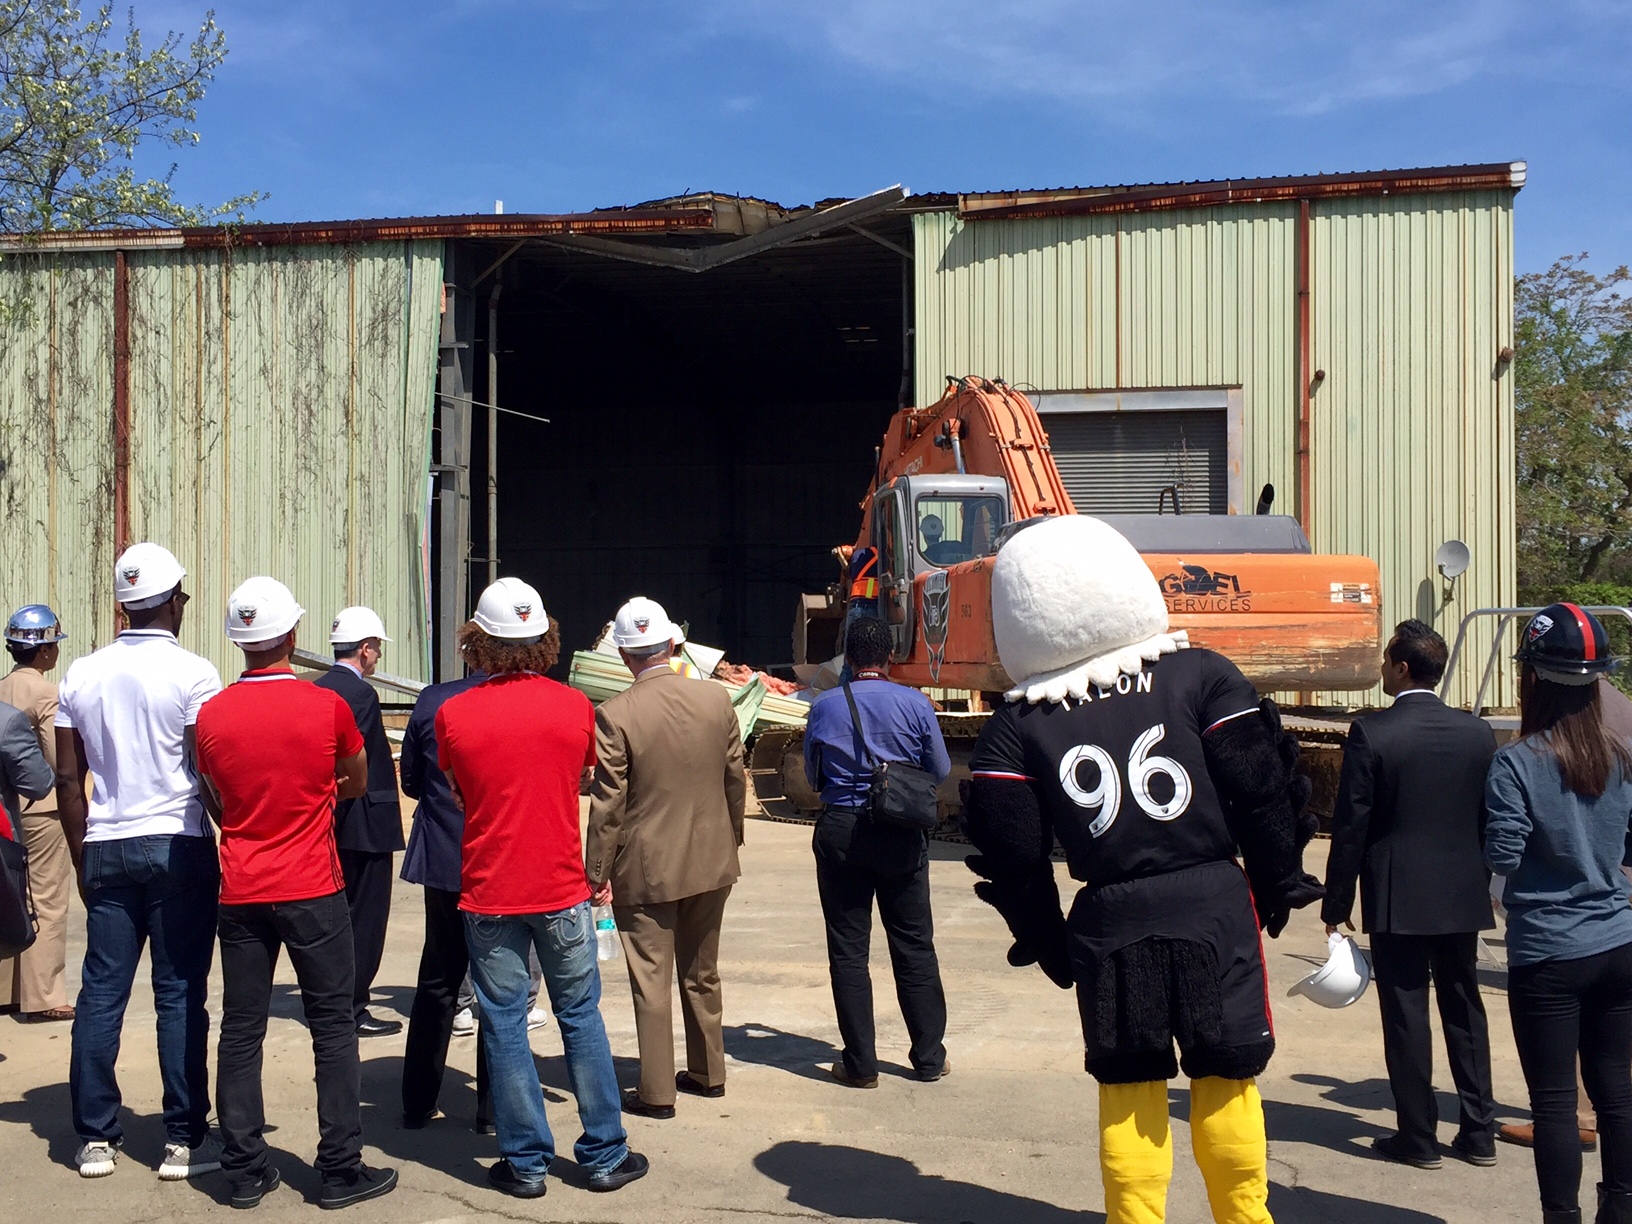 District and team leaders, and the DC United mascot, look on as a backhoe tears down the empty structure on the stadium site. (WTOP/Megan Cloherty)